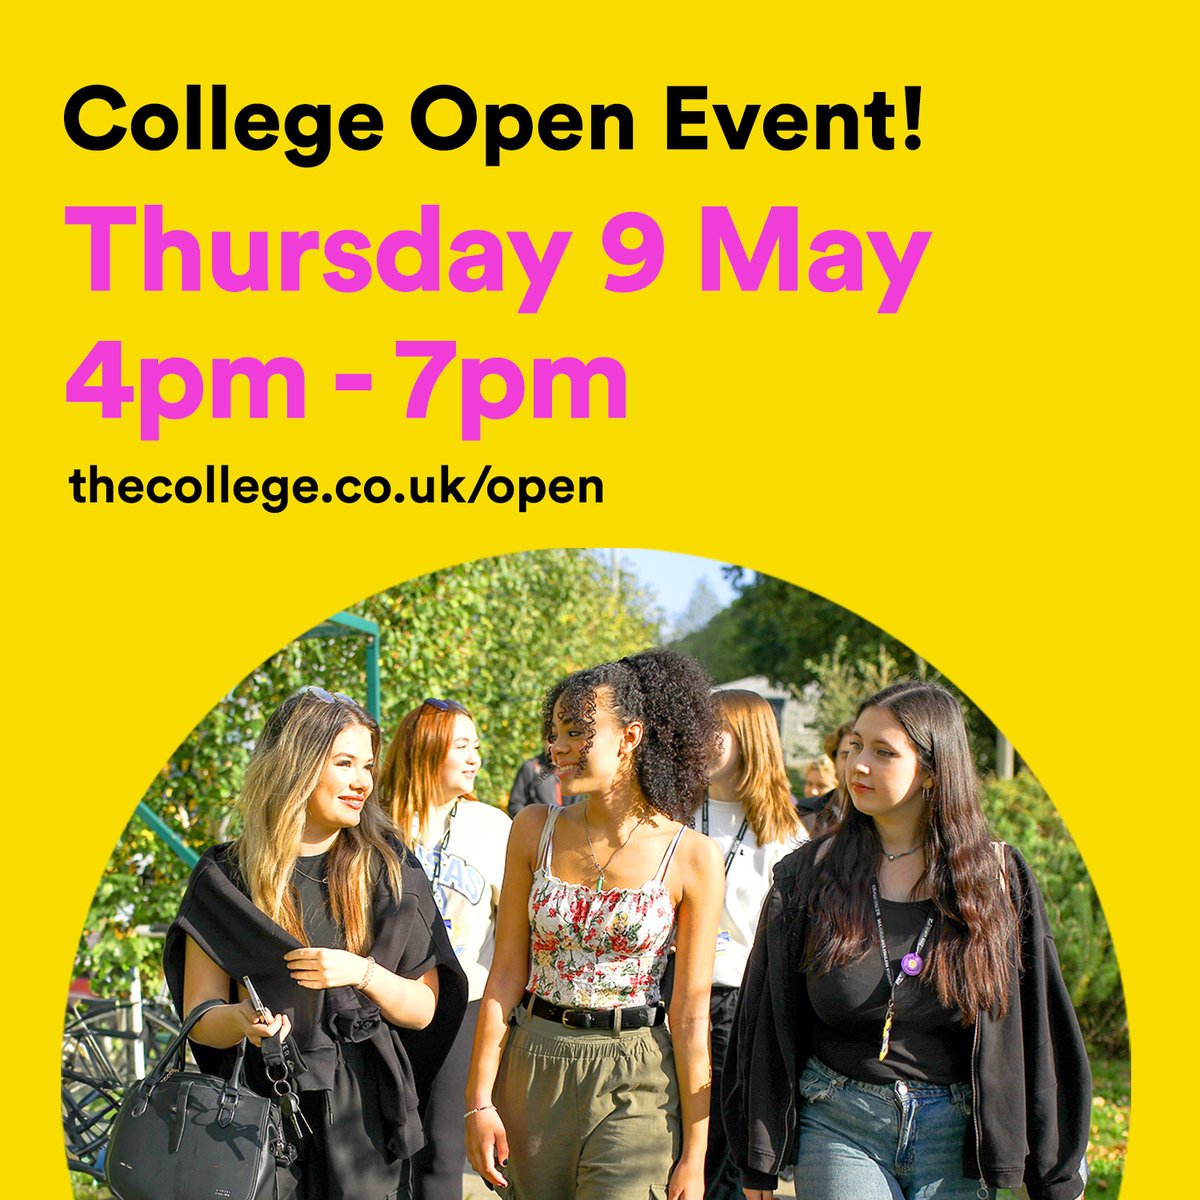 This is your final opportunity this year to see our amazing facilities, meet expert tutors, get careers advice and find out about our range of courses. For more info and tickets, visit thecollege.co.uk/open